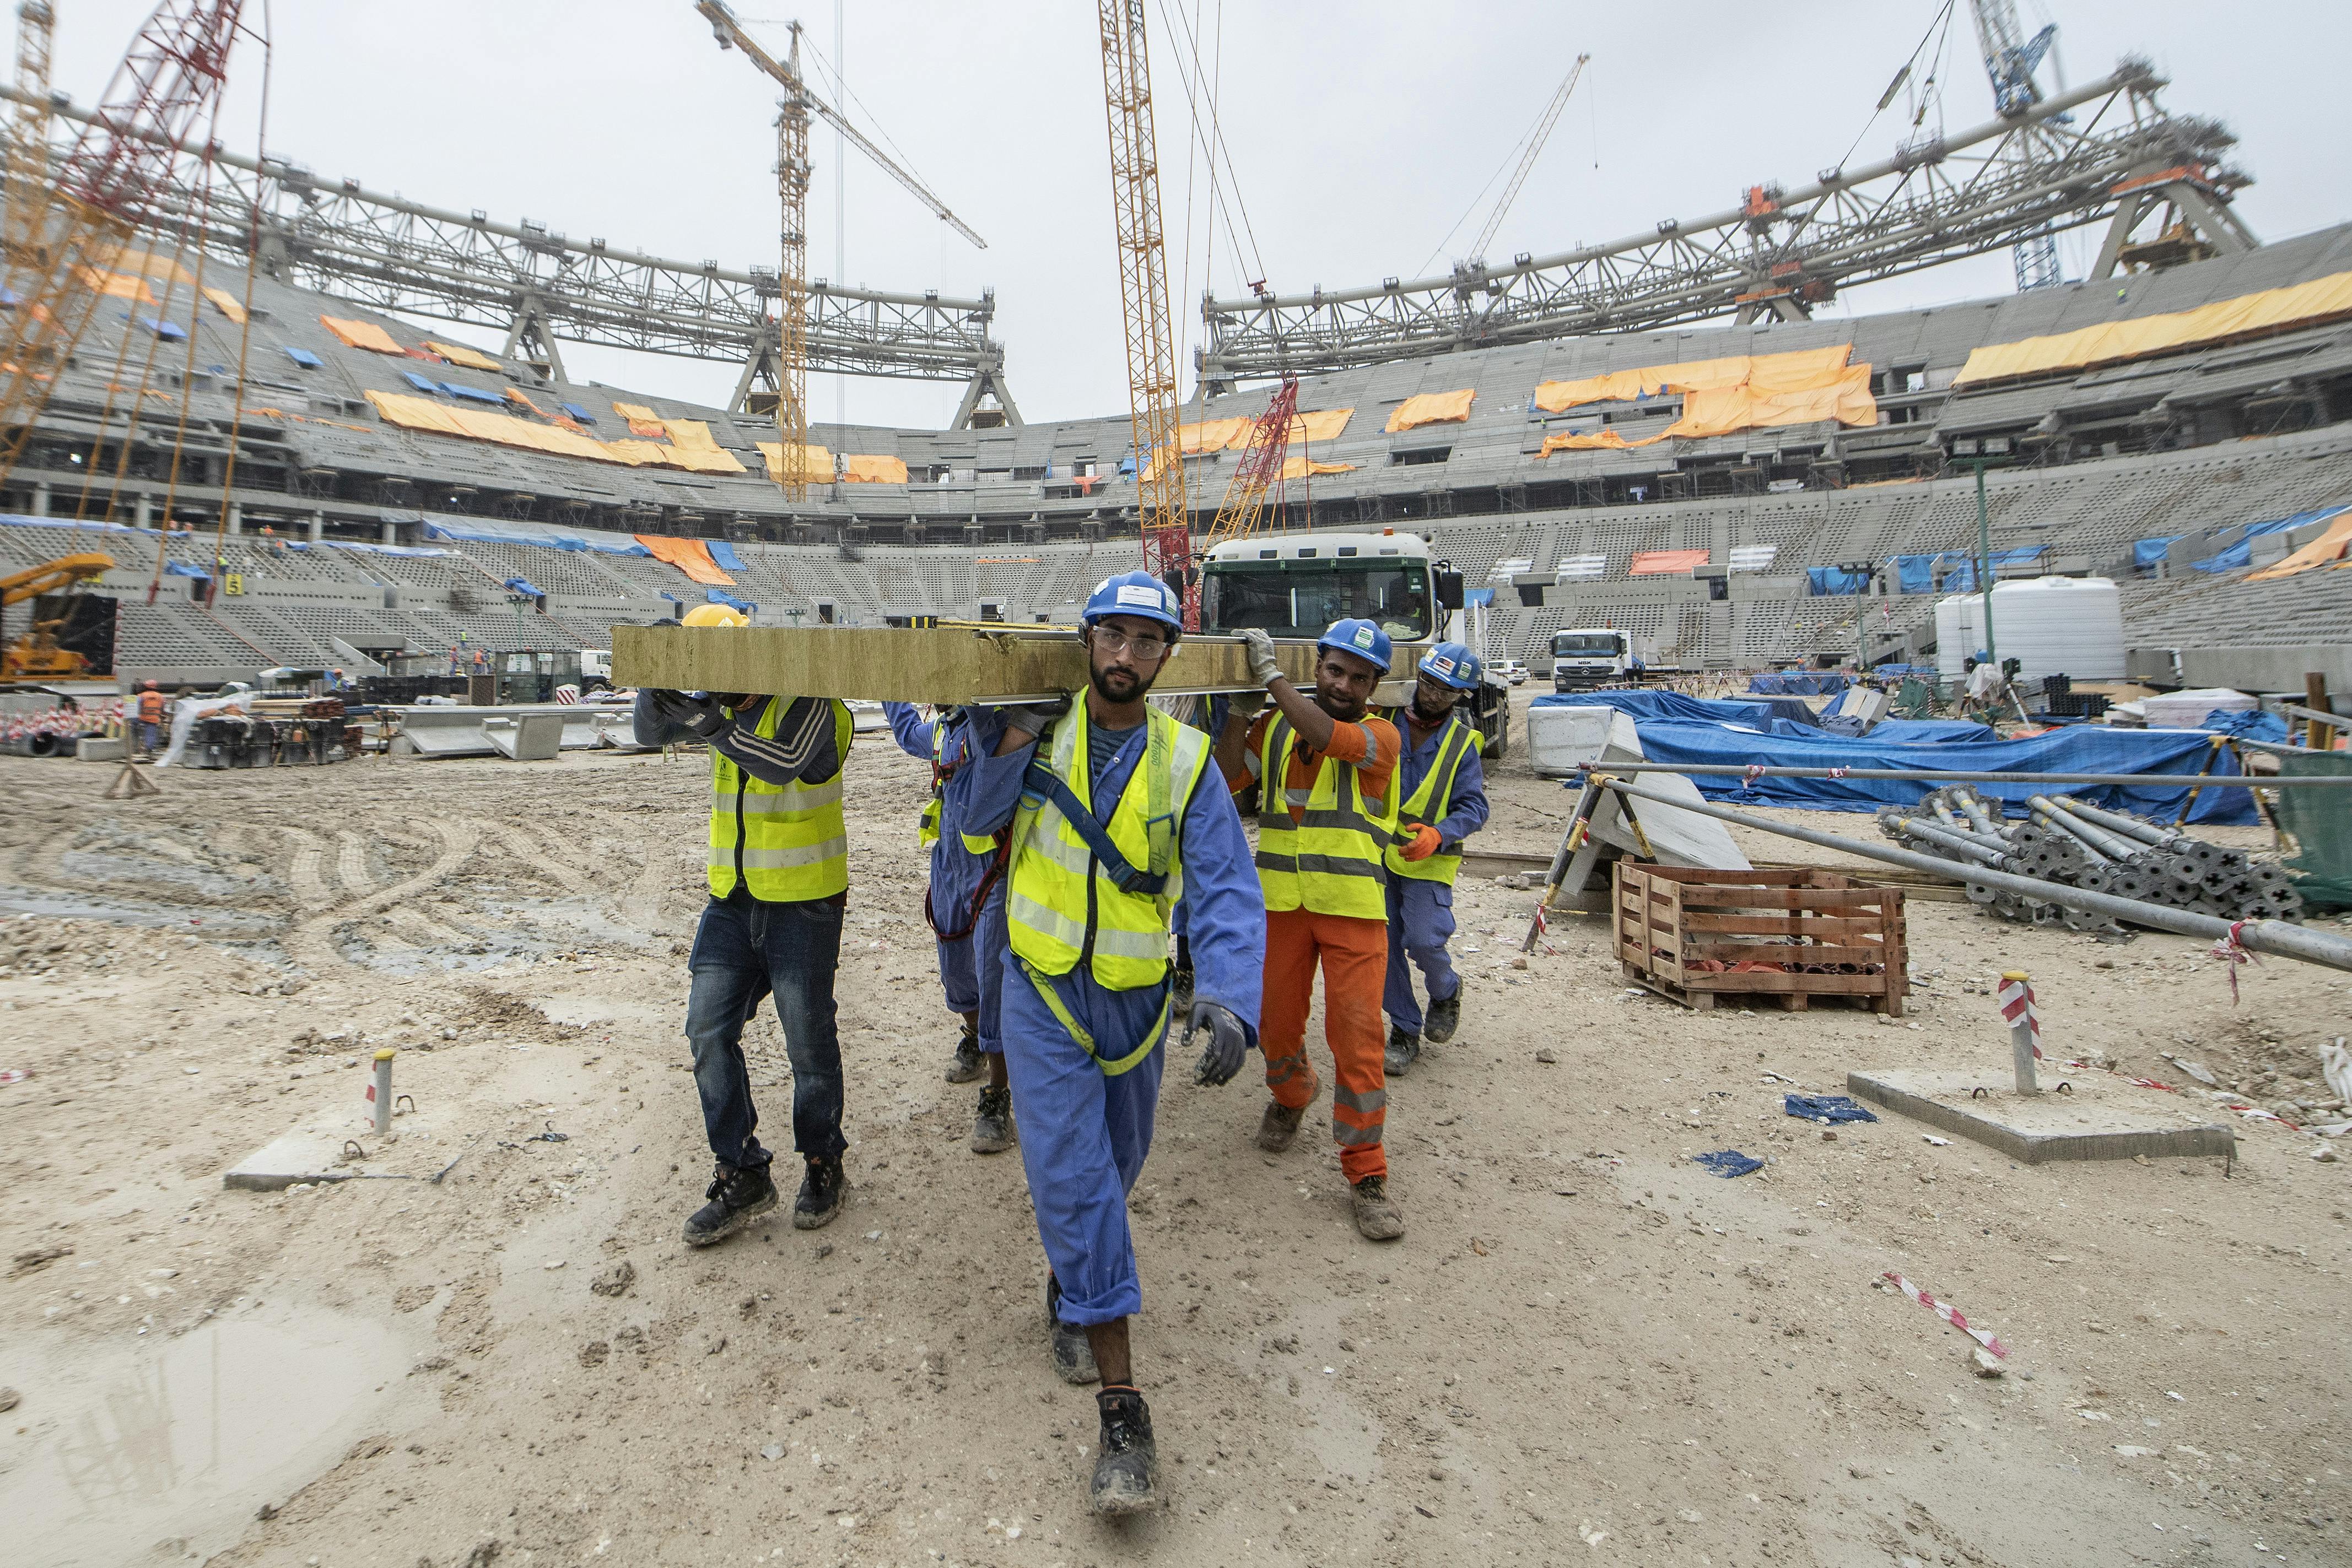  	DOHA, QATAR - DECEMBER 10: General view of the construction works of the Lusail Stadium on December 10, 2019 in Doha, Qatar. The Lusail Stadium will host the opening match and the final match of the next FIFA World Cup Qatar 2022 (Photo by David Ramos - FIFA/FIFA via Getty Images) 